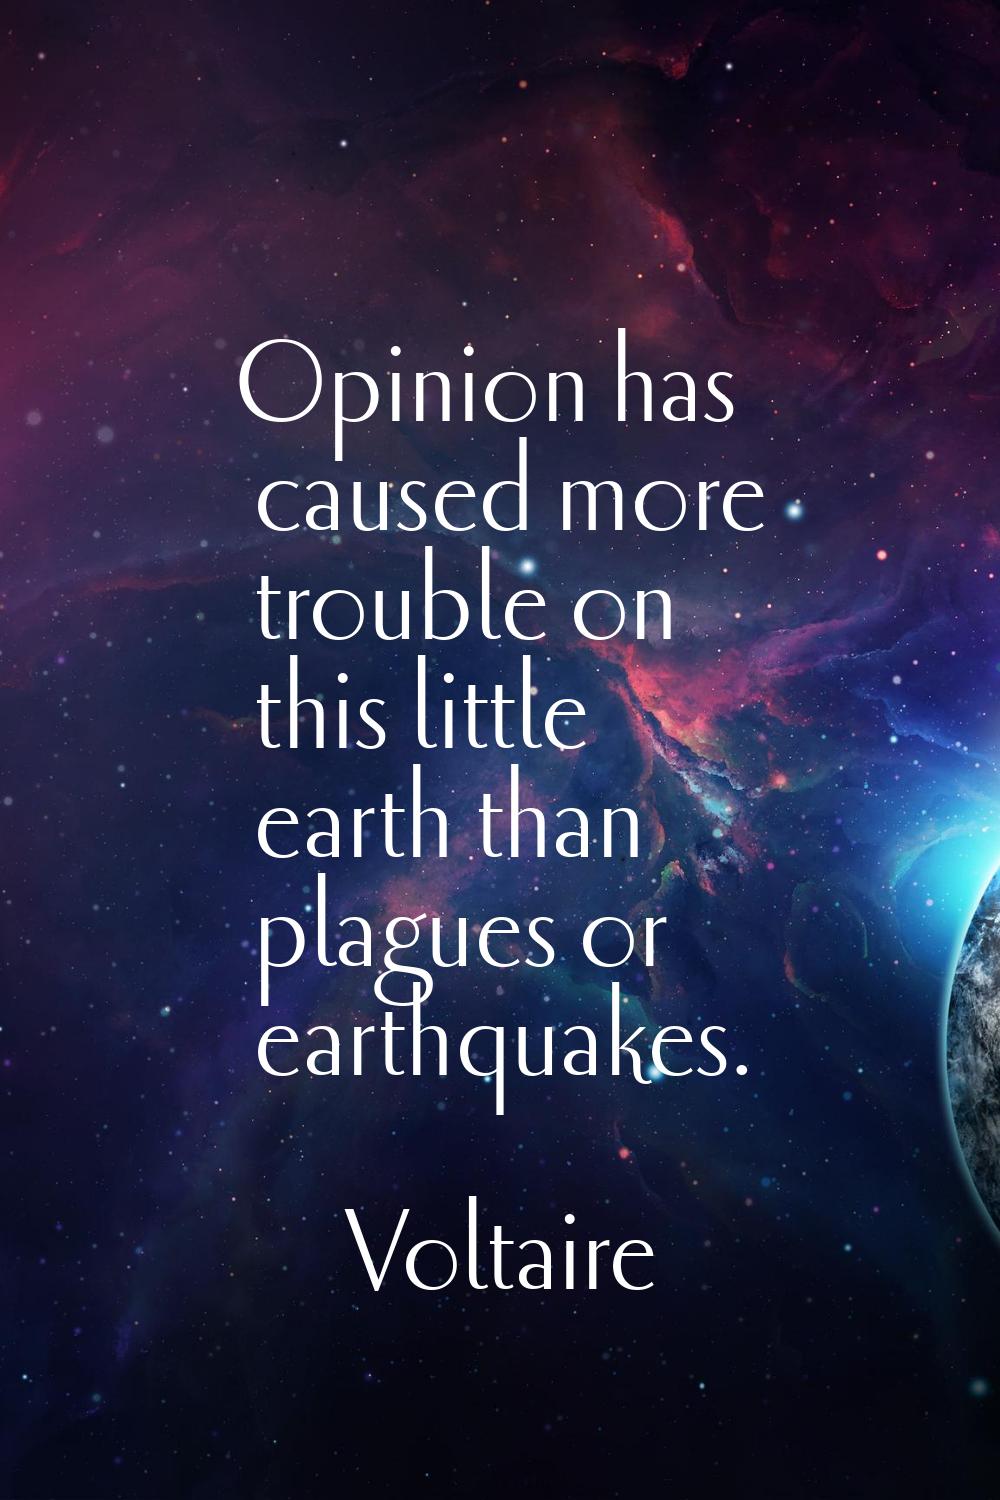 Opinion has caused more trouble on this little earth than plagues or earthquakes.